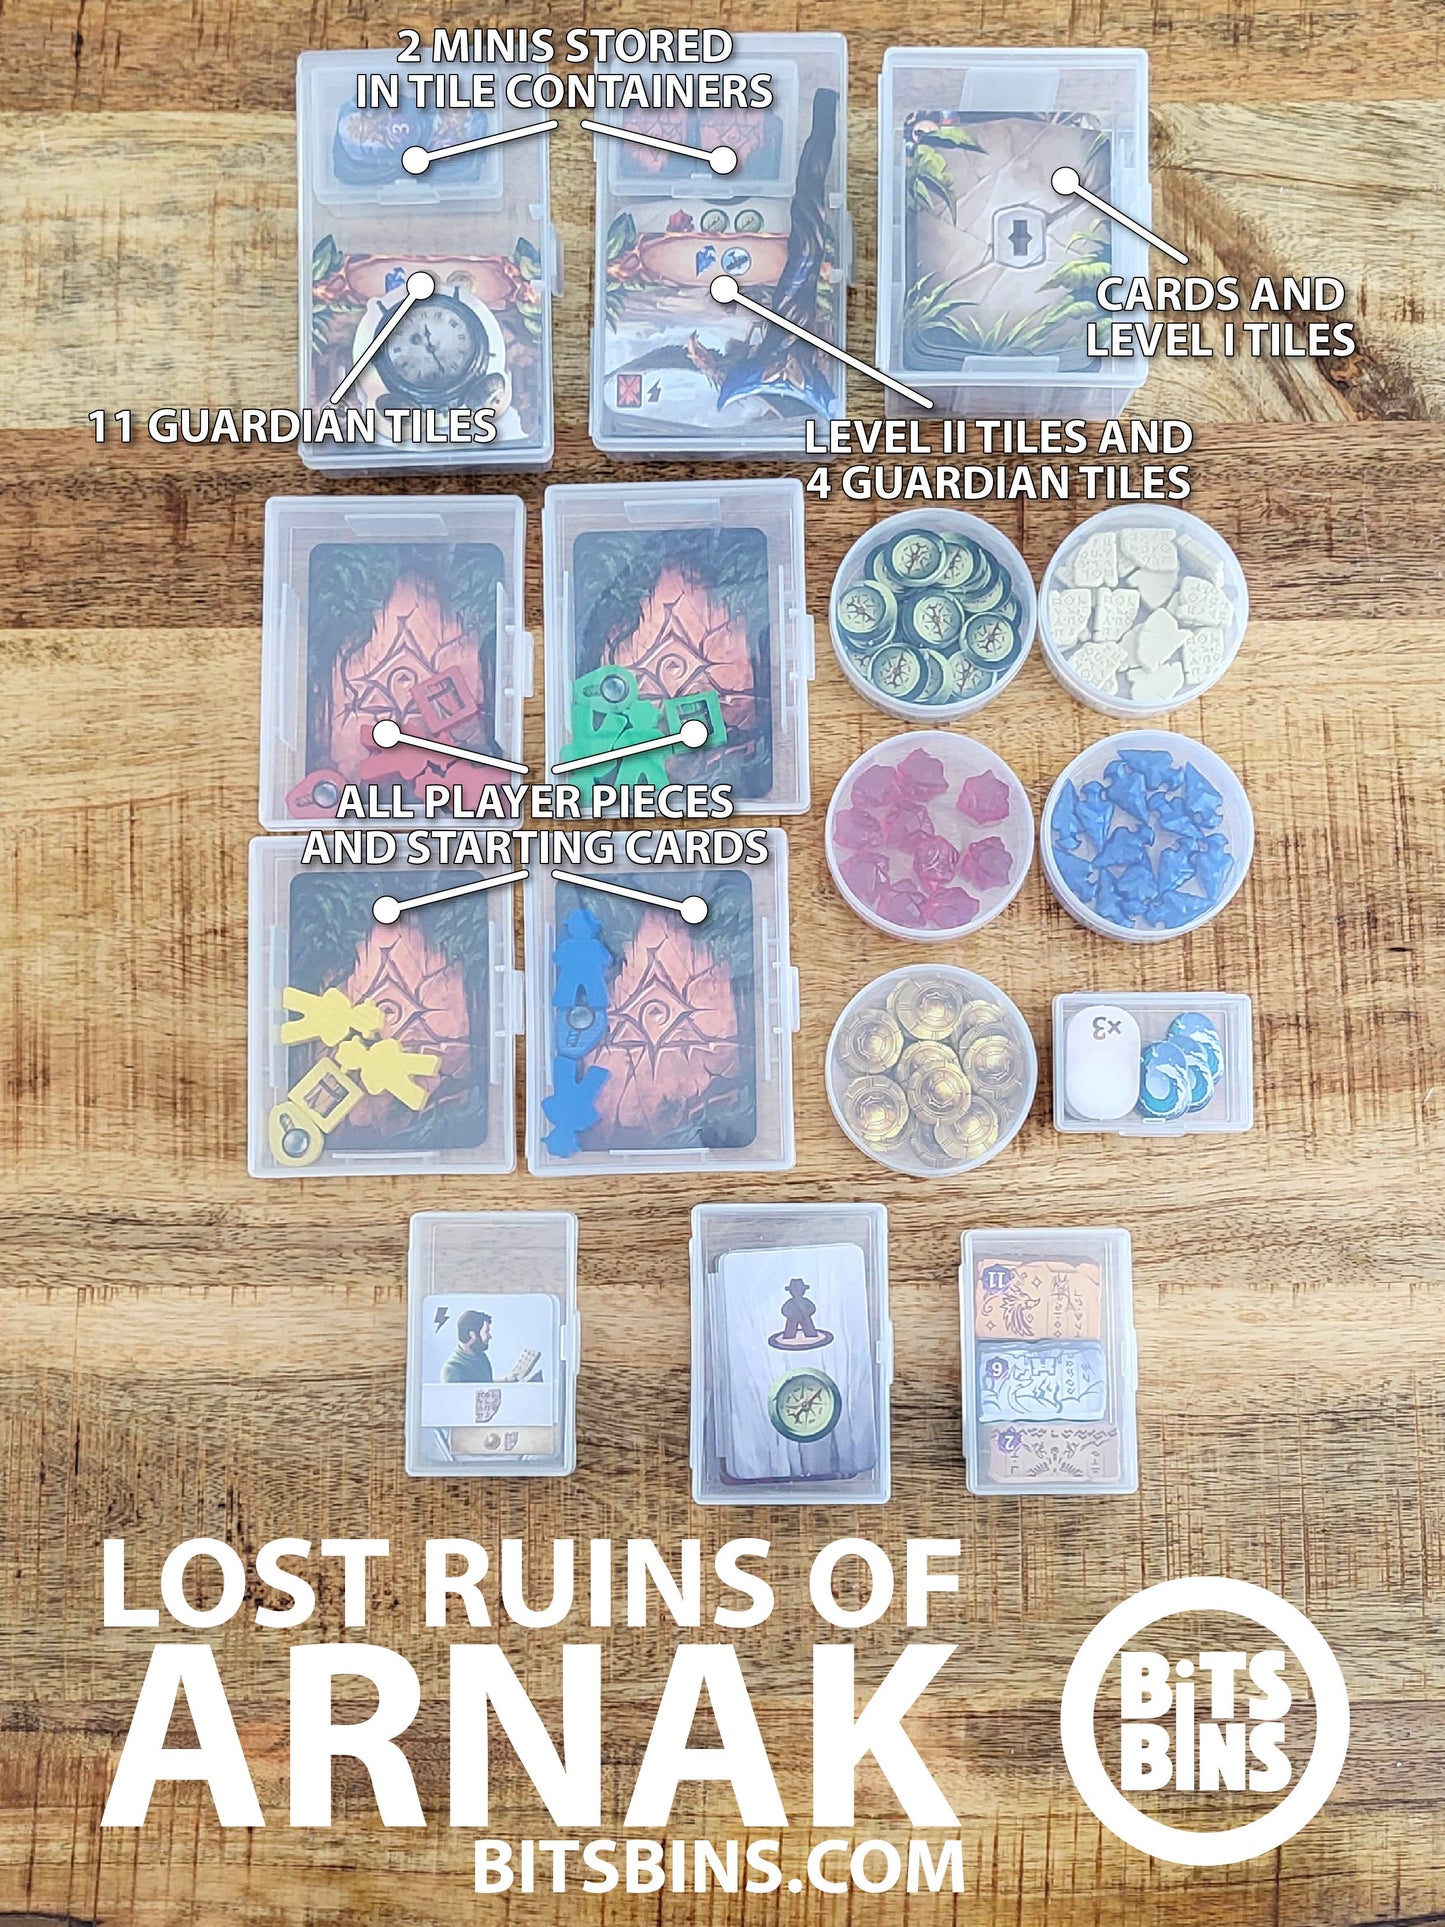 RECOMMENDED Lost Ruins of Arnak - 5 Pods, 3 Minis, 2 Originals, 1 XL, 4 Card Boxes, 1 100+ Card Box